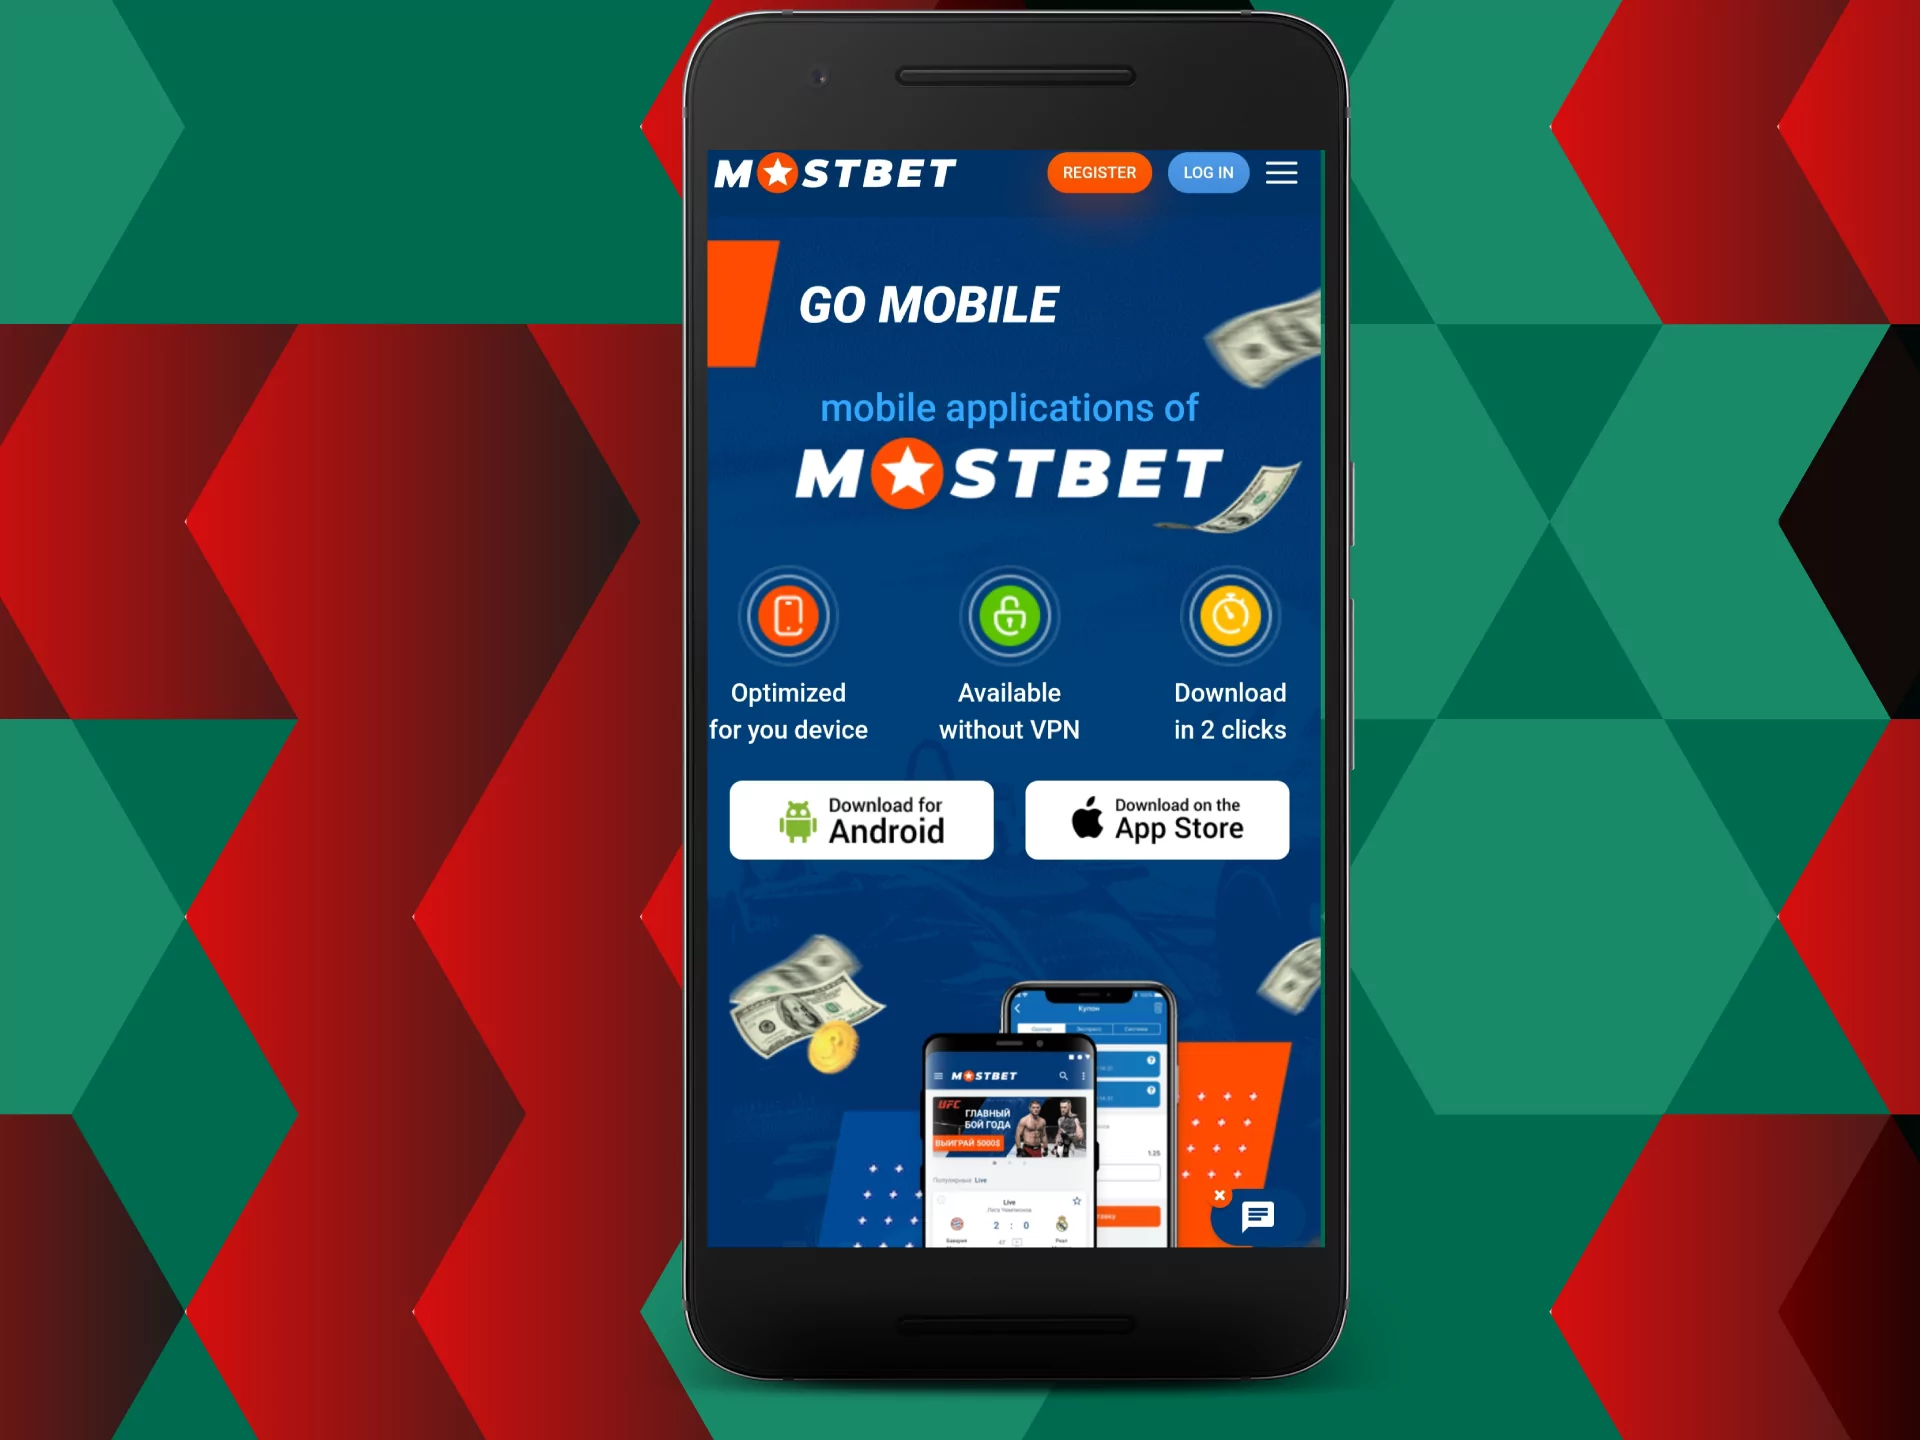 You can install the Mostbet app from the official website.